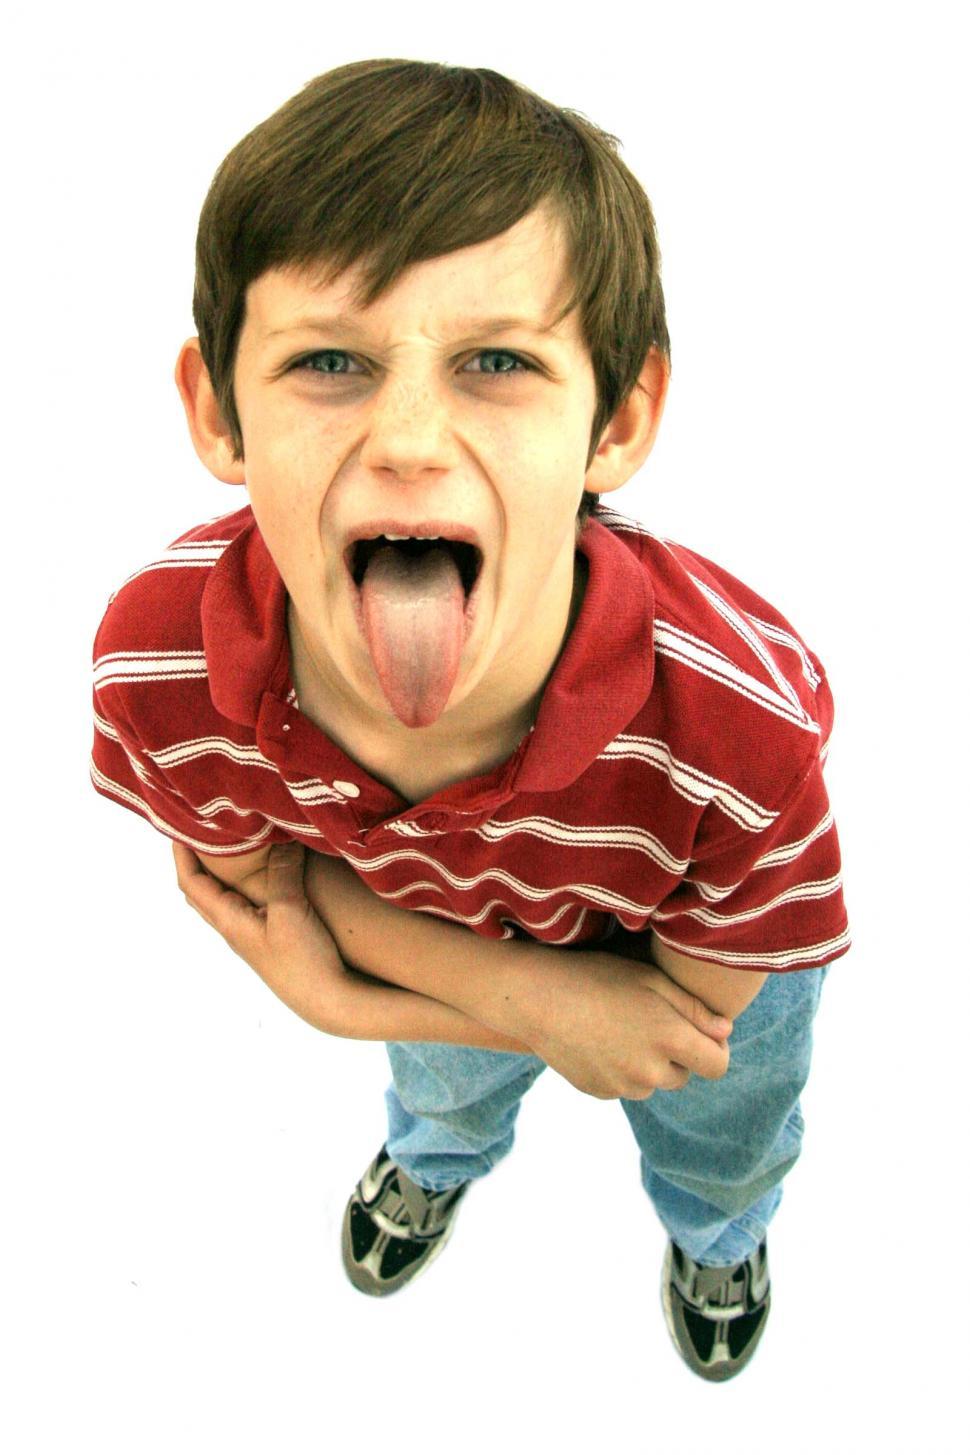 Free Image of Kid sticking out tongue 